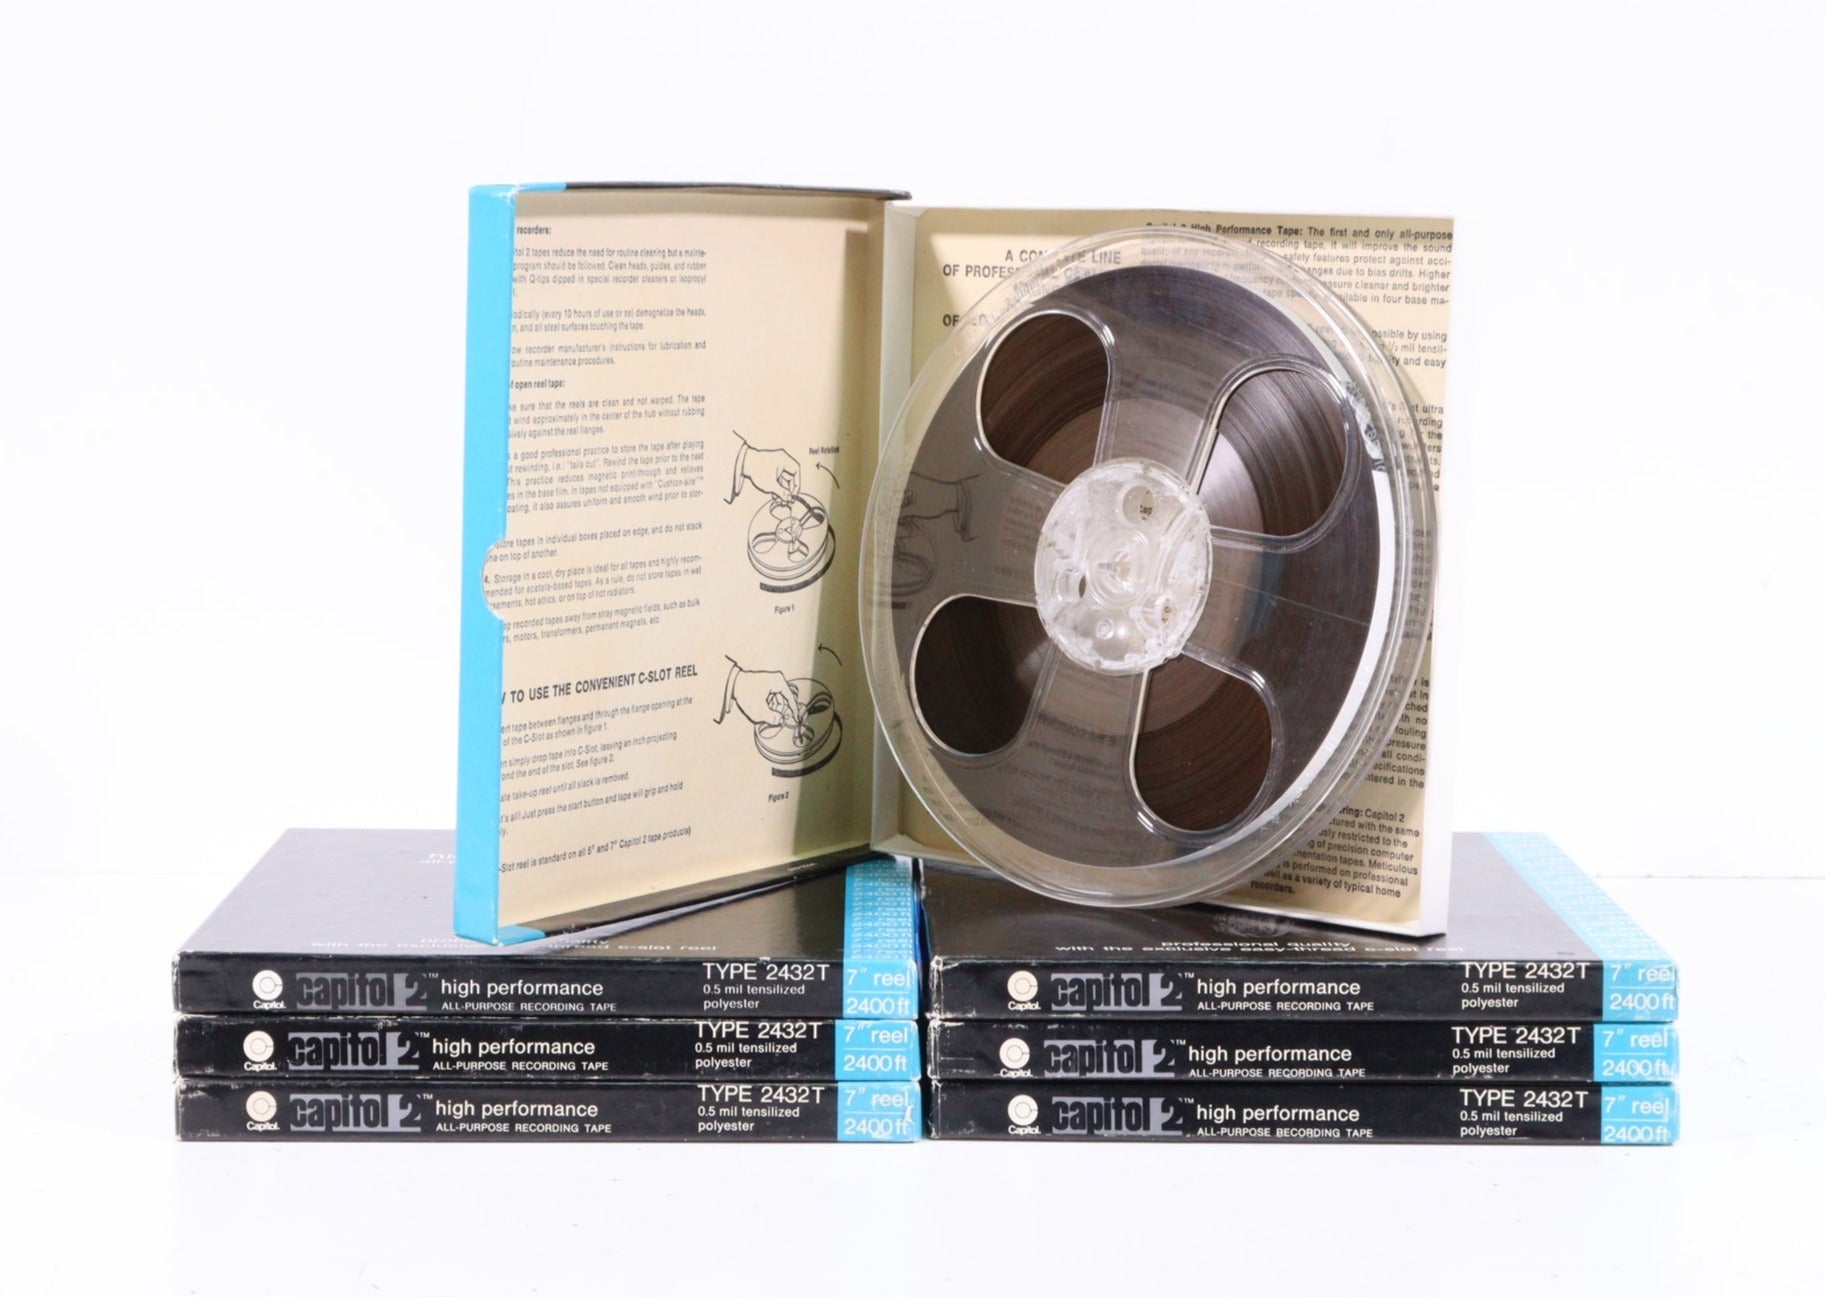 http://spencertified.com/cdn/shop/files/Capitol-2-All-Purpose-Magnetic-Recording-Tape-Type-2432T-7-Reel-200ft-Bundle-of-Seven-Reel-to-Reel-Accessories.jpg?v=1697749328